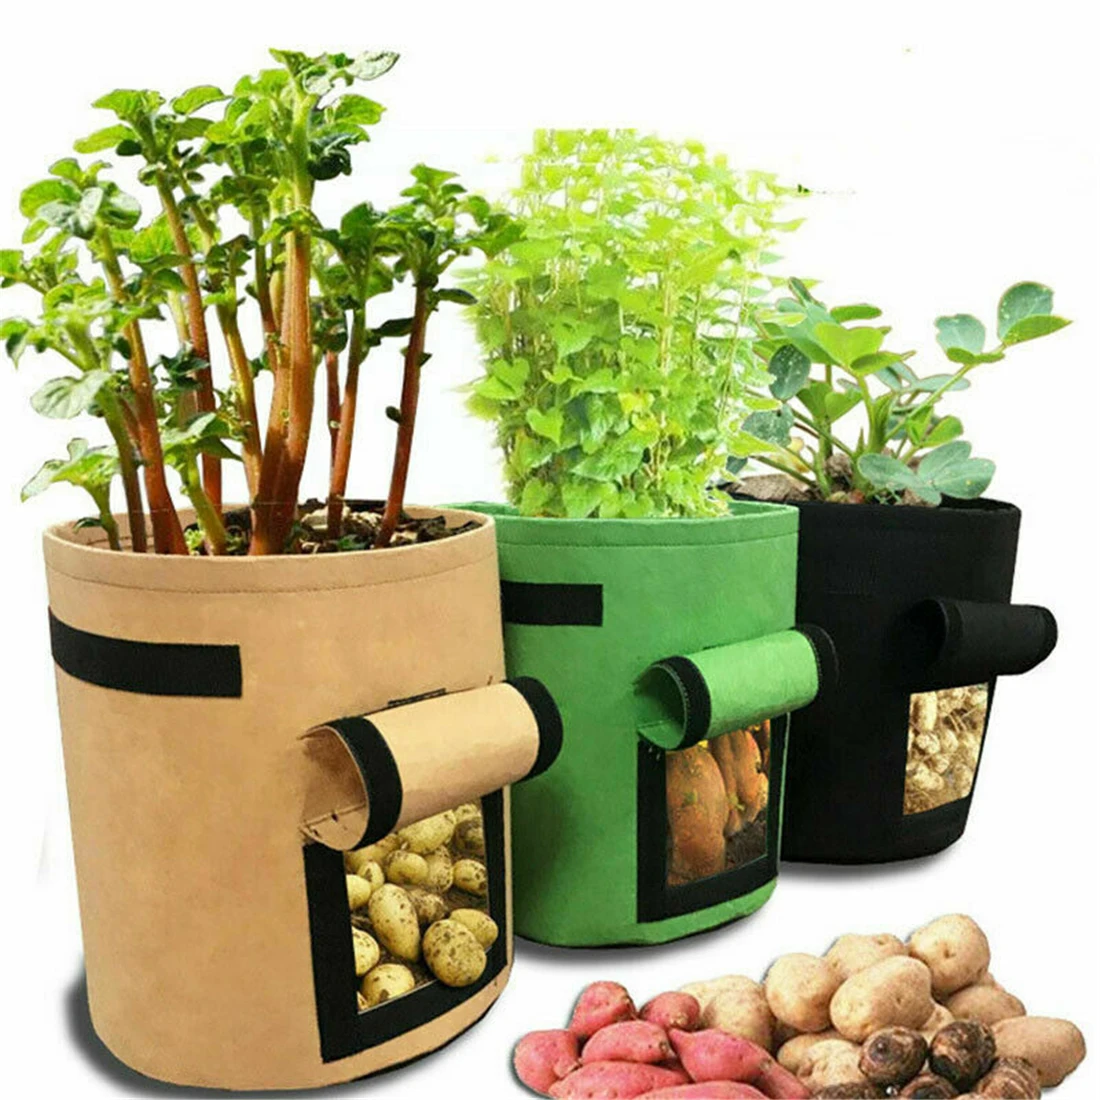 Plants Planting Bags Non-Woven Fabrics Potatoes Vegetables Plant Growing Bags Garden Flowers Planting Cultivation Tools plants sowing machine seedling transplant tools handheld transplanter seedlings garden agriculture growing plants moving tools